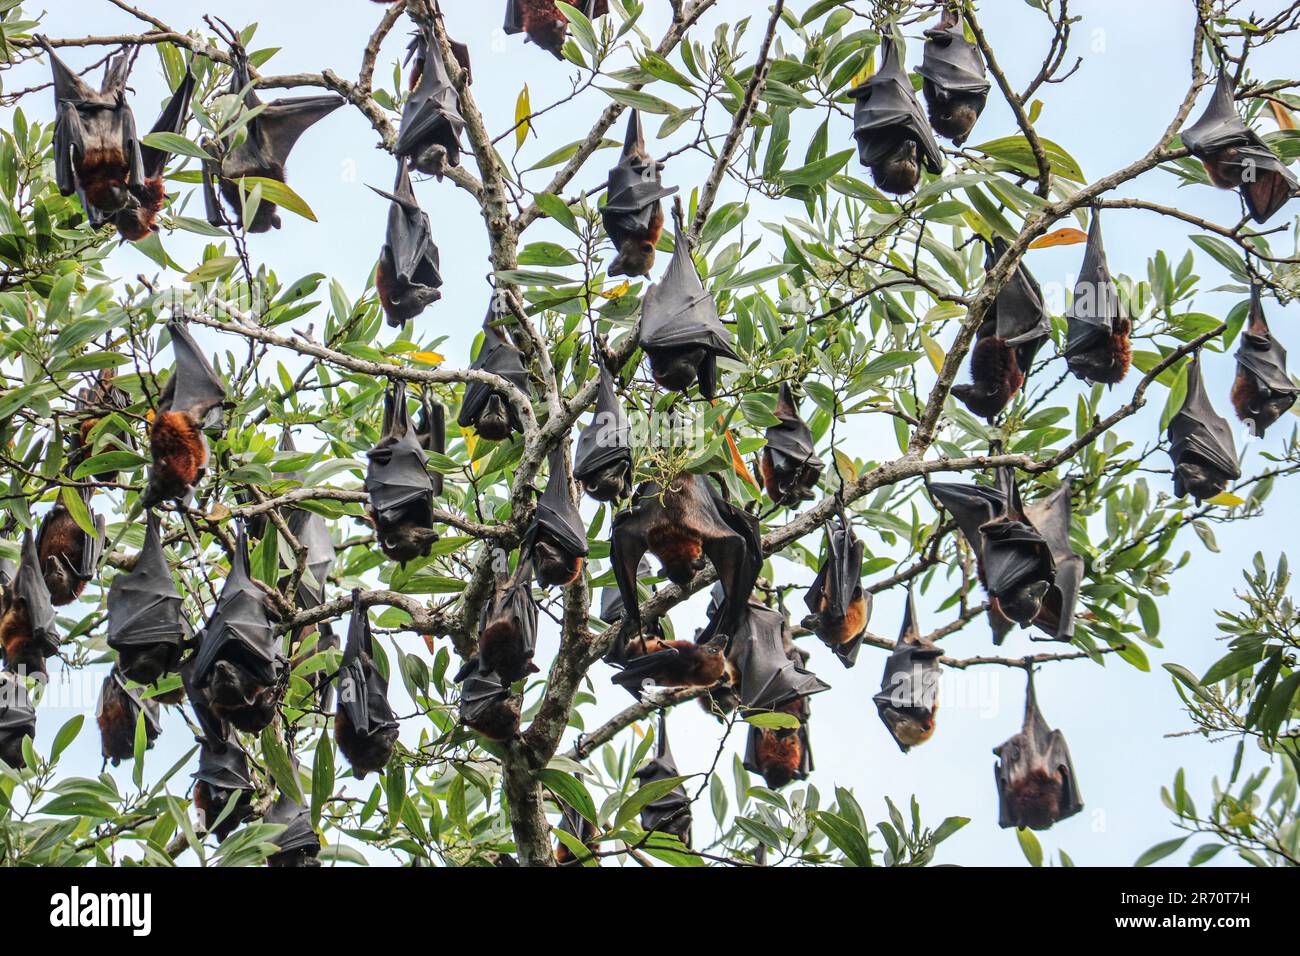 Fruit bats hang upside down from tree branches. Flying foxes (Pteropus). Stock Photo